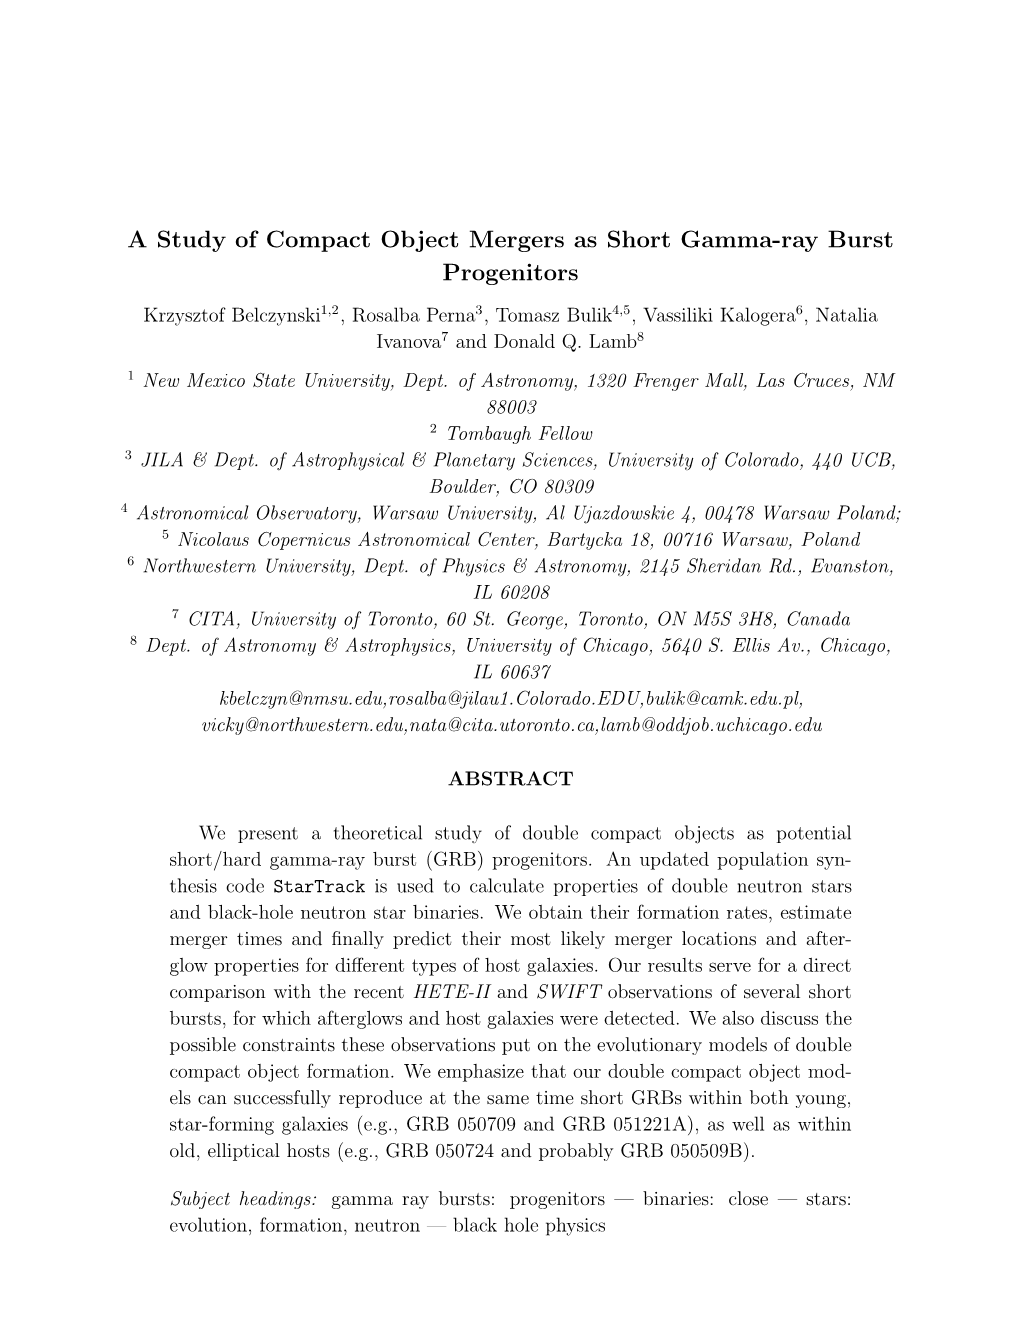 A Study of Compact Object Mergers As Short Gamma-Ray Burst Progenitors